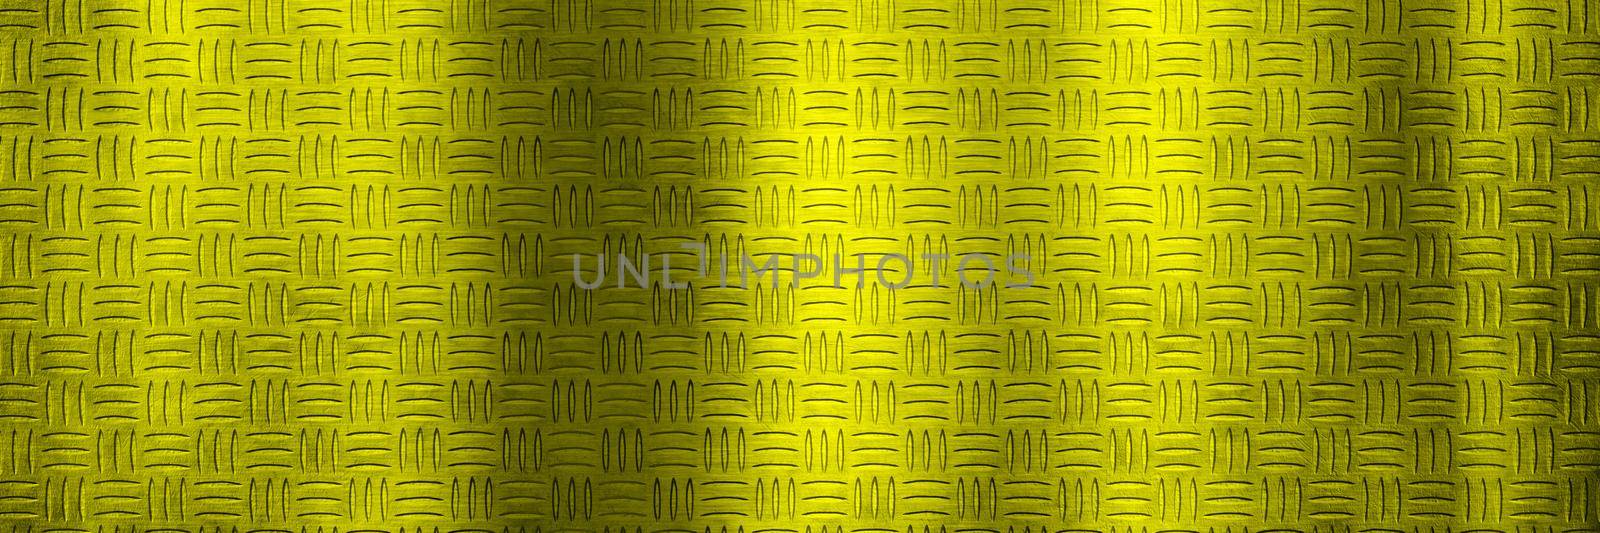 Diamond gold metal background. Brushed texture. 3d rendering by Taut